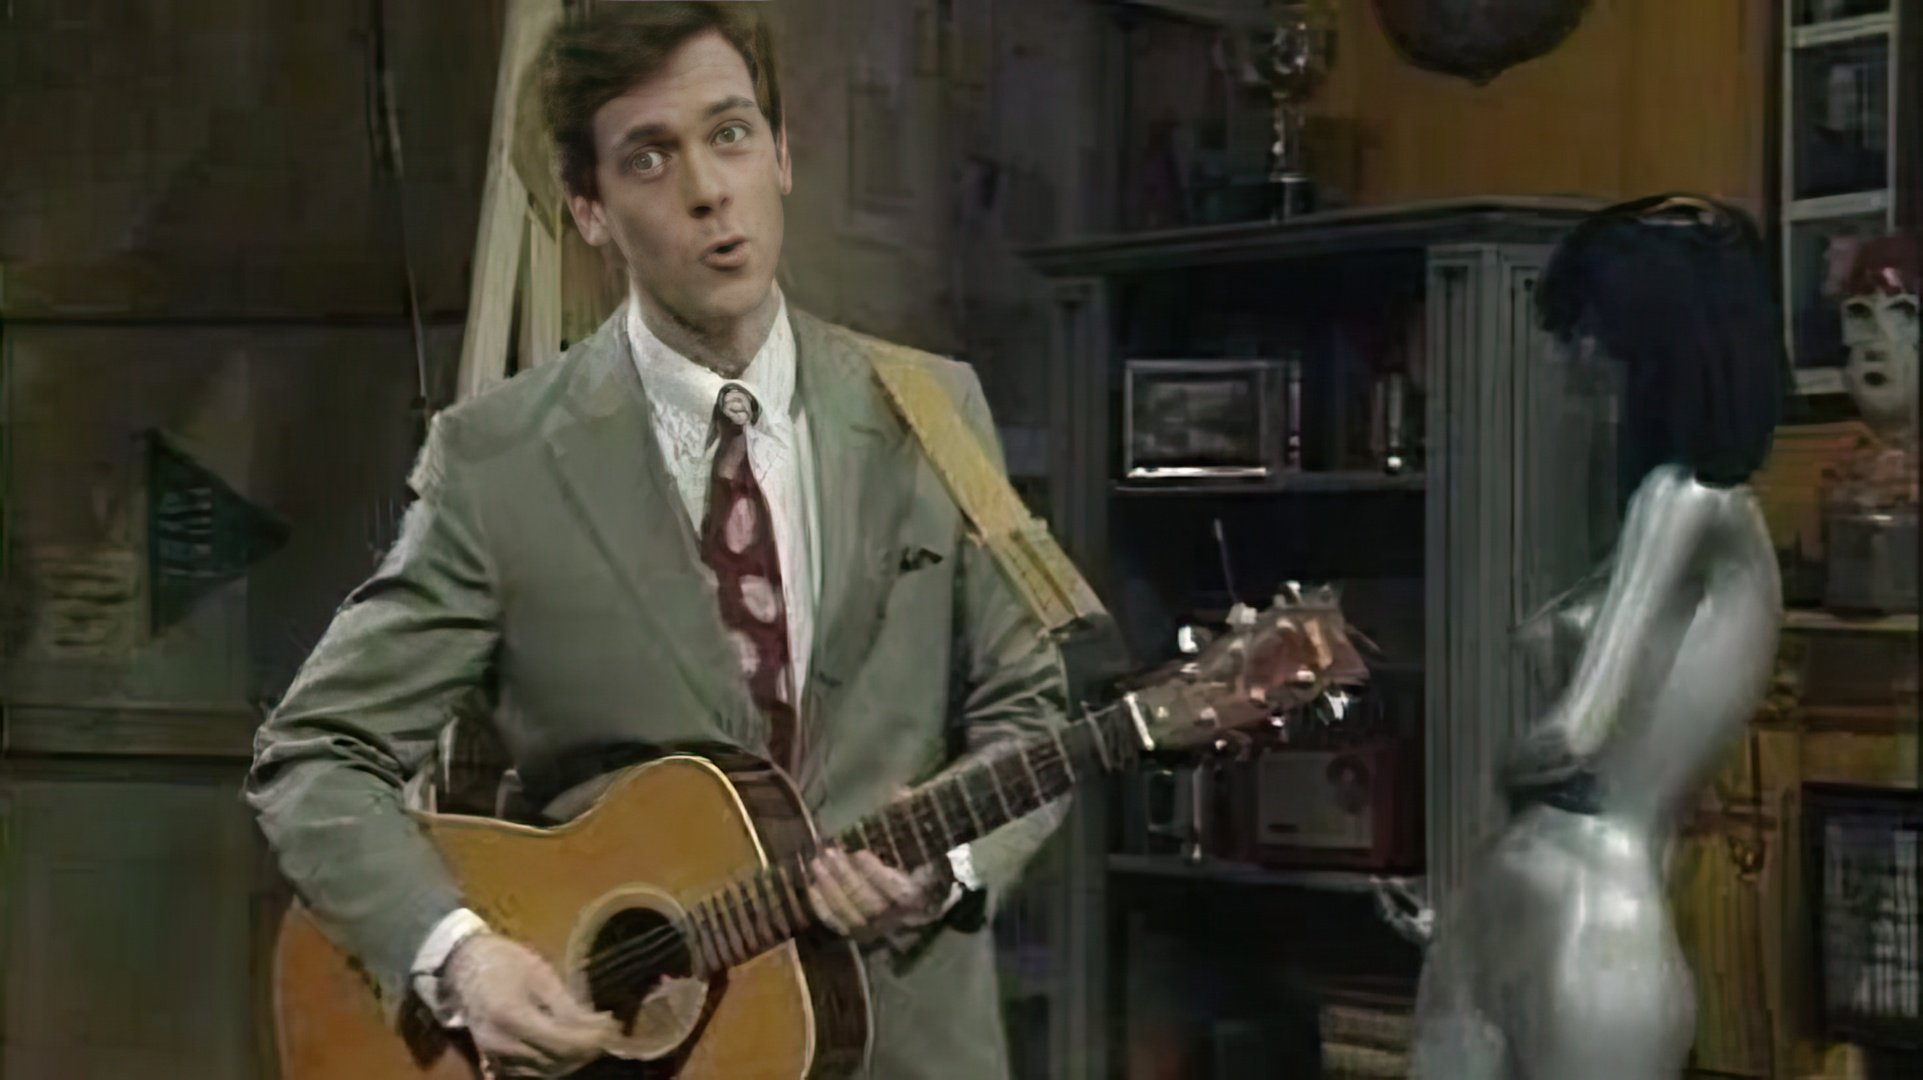 Hugh Laurie plays the guitar, piano, and harmonica excellently